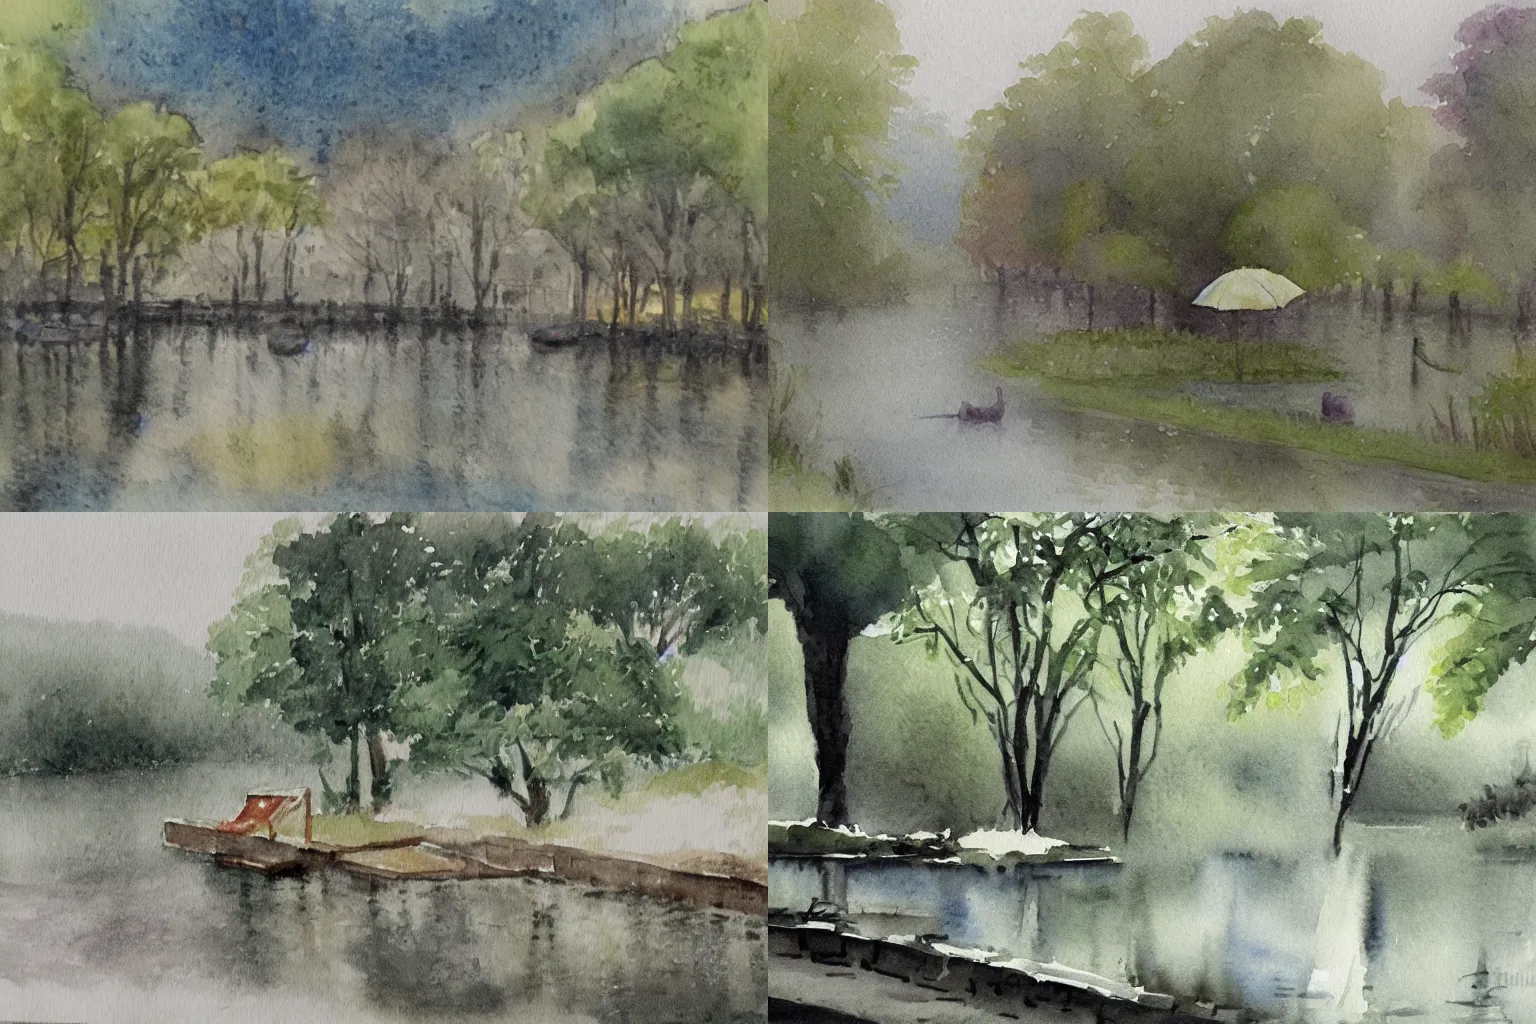 A rainy day by the riverside, watercolor painting | Stable Diffusion ...